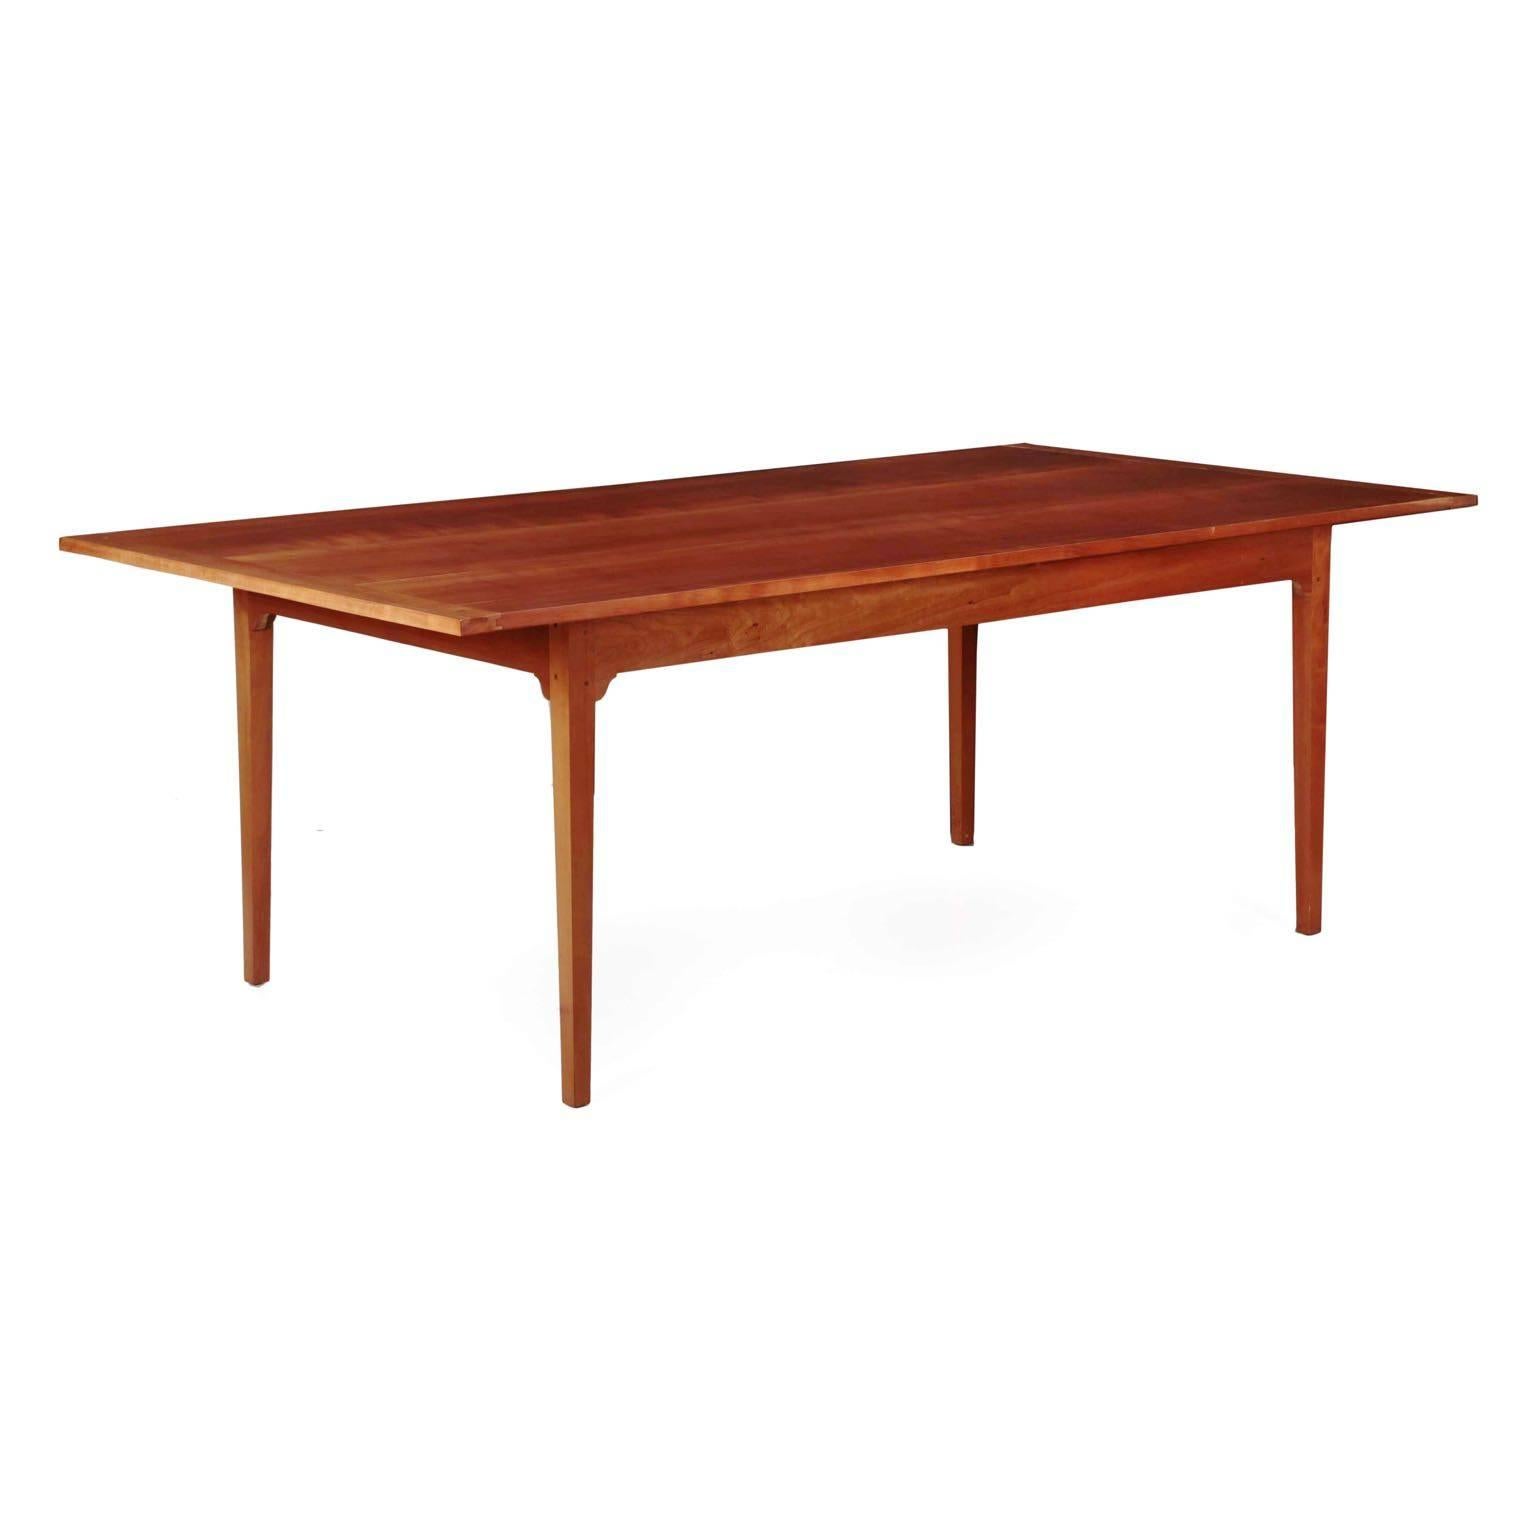 A carefully handmade custom table executed in solid cherrywood, the dining table is austere and orderly in its’ clean lines and angular form. The long boards are capped with breadboard ends with small pins affixing the tongue-in-groove joints. The